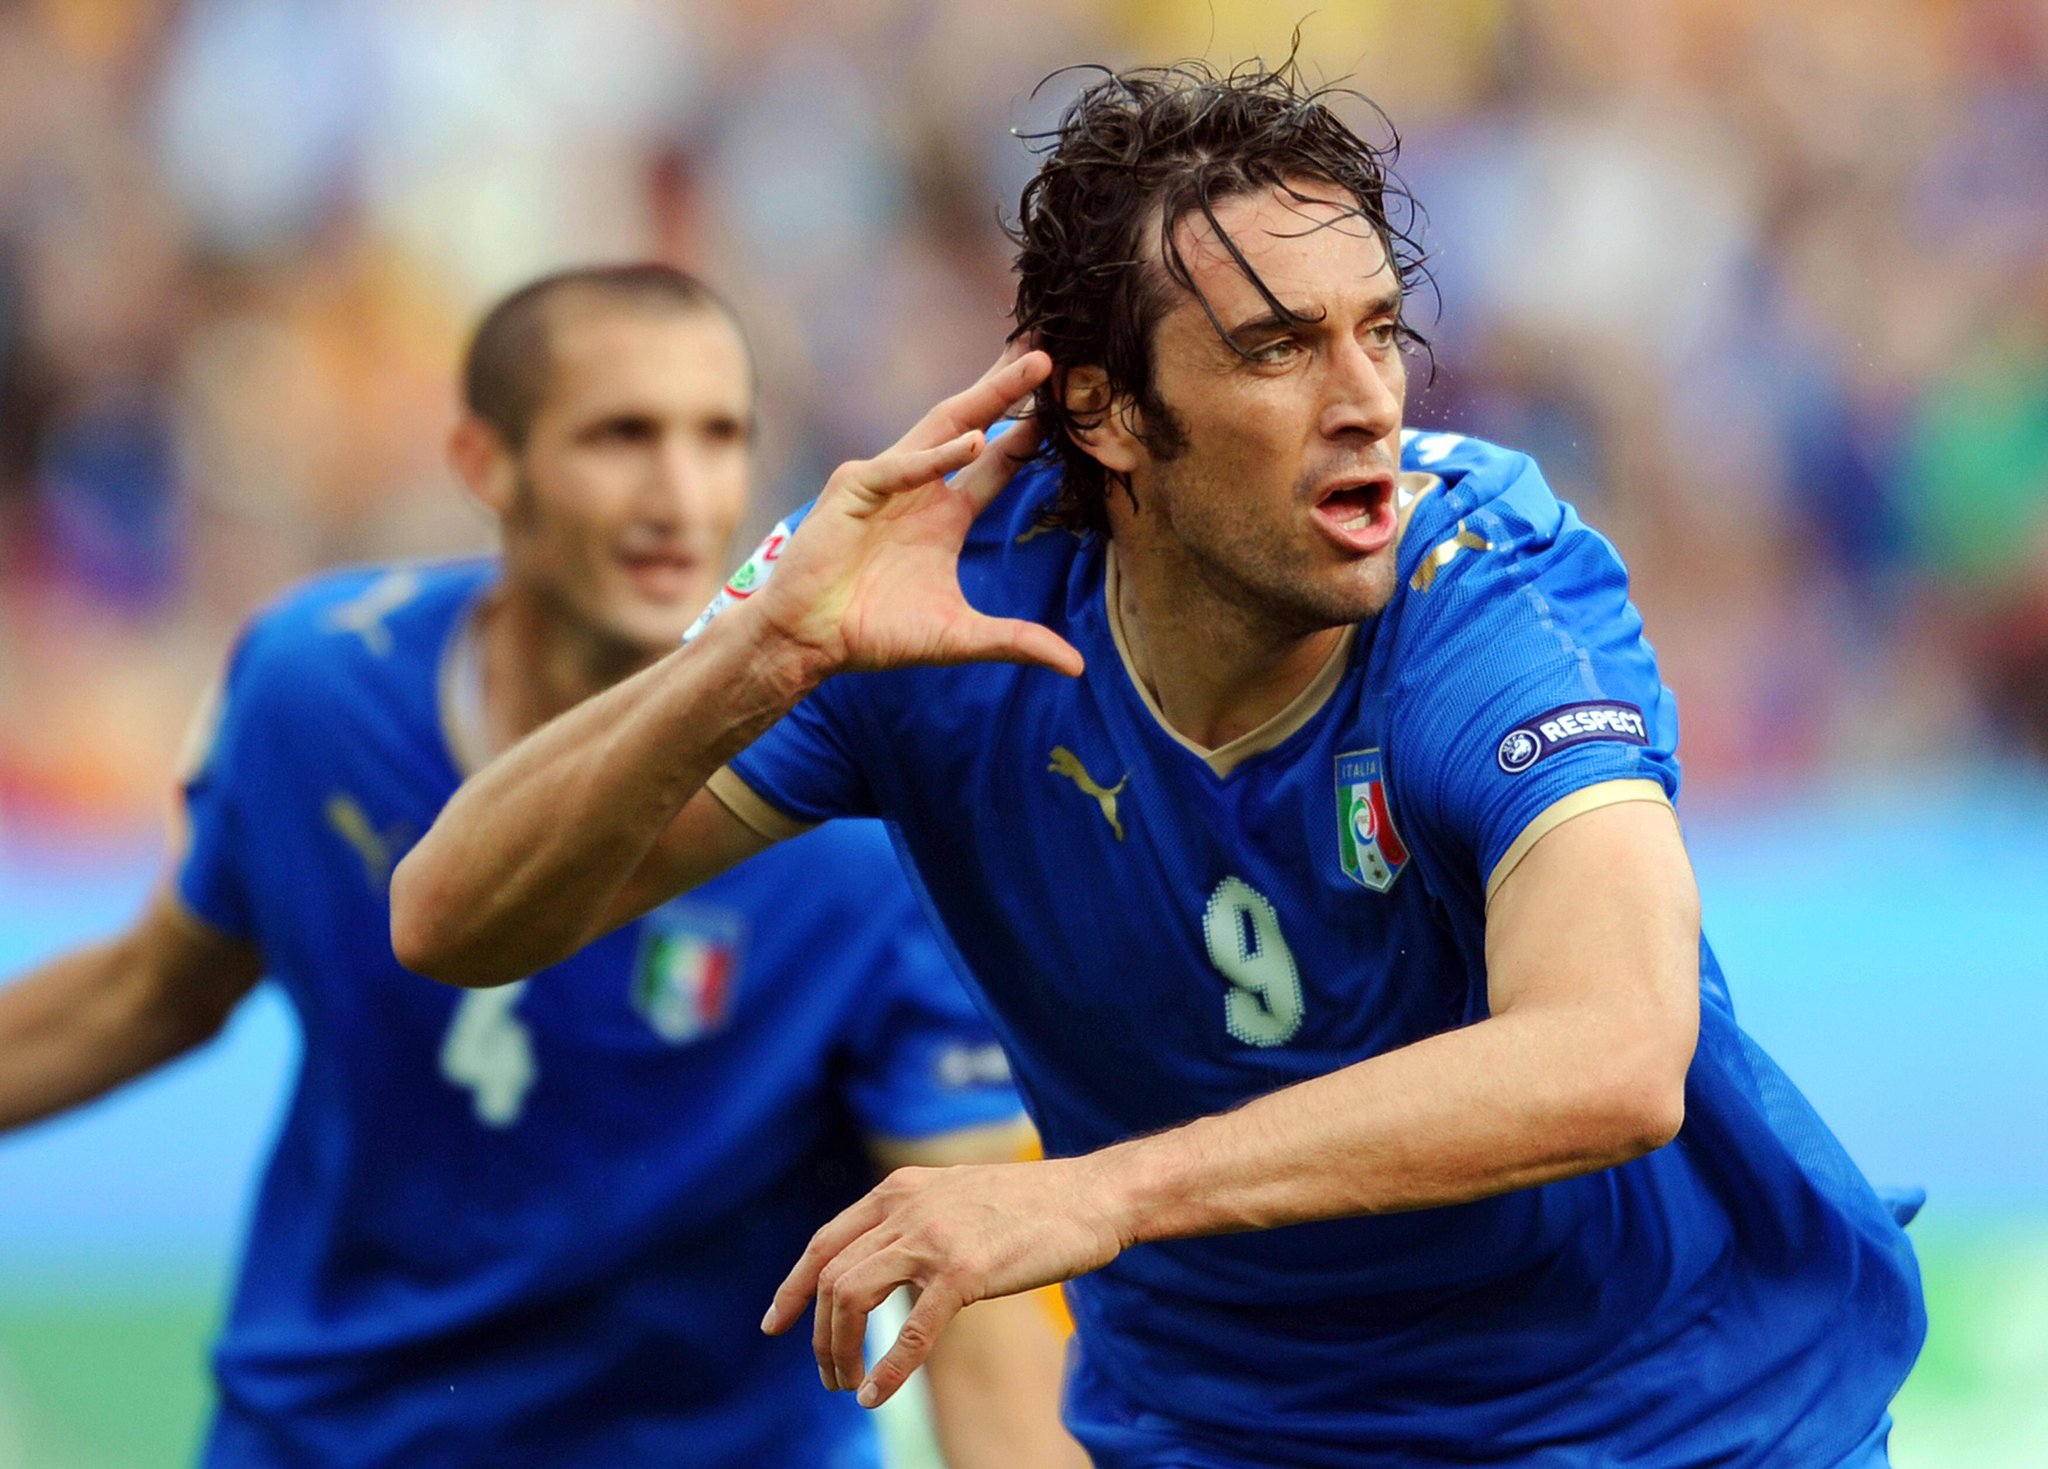 Happy 38th birthday, former striker Luca Toni - currently top scorer in 